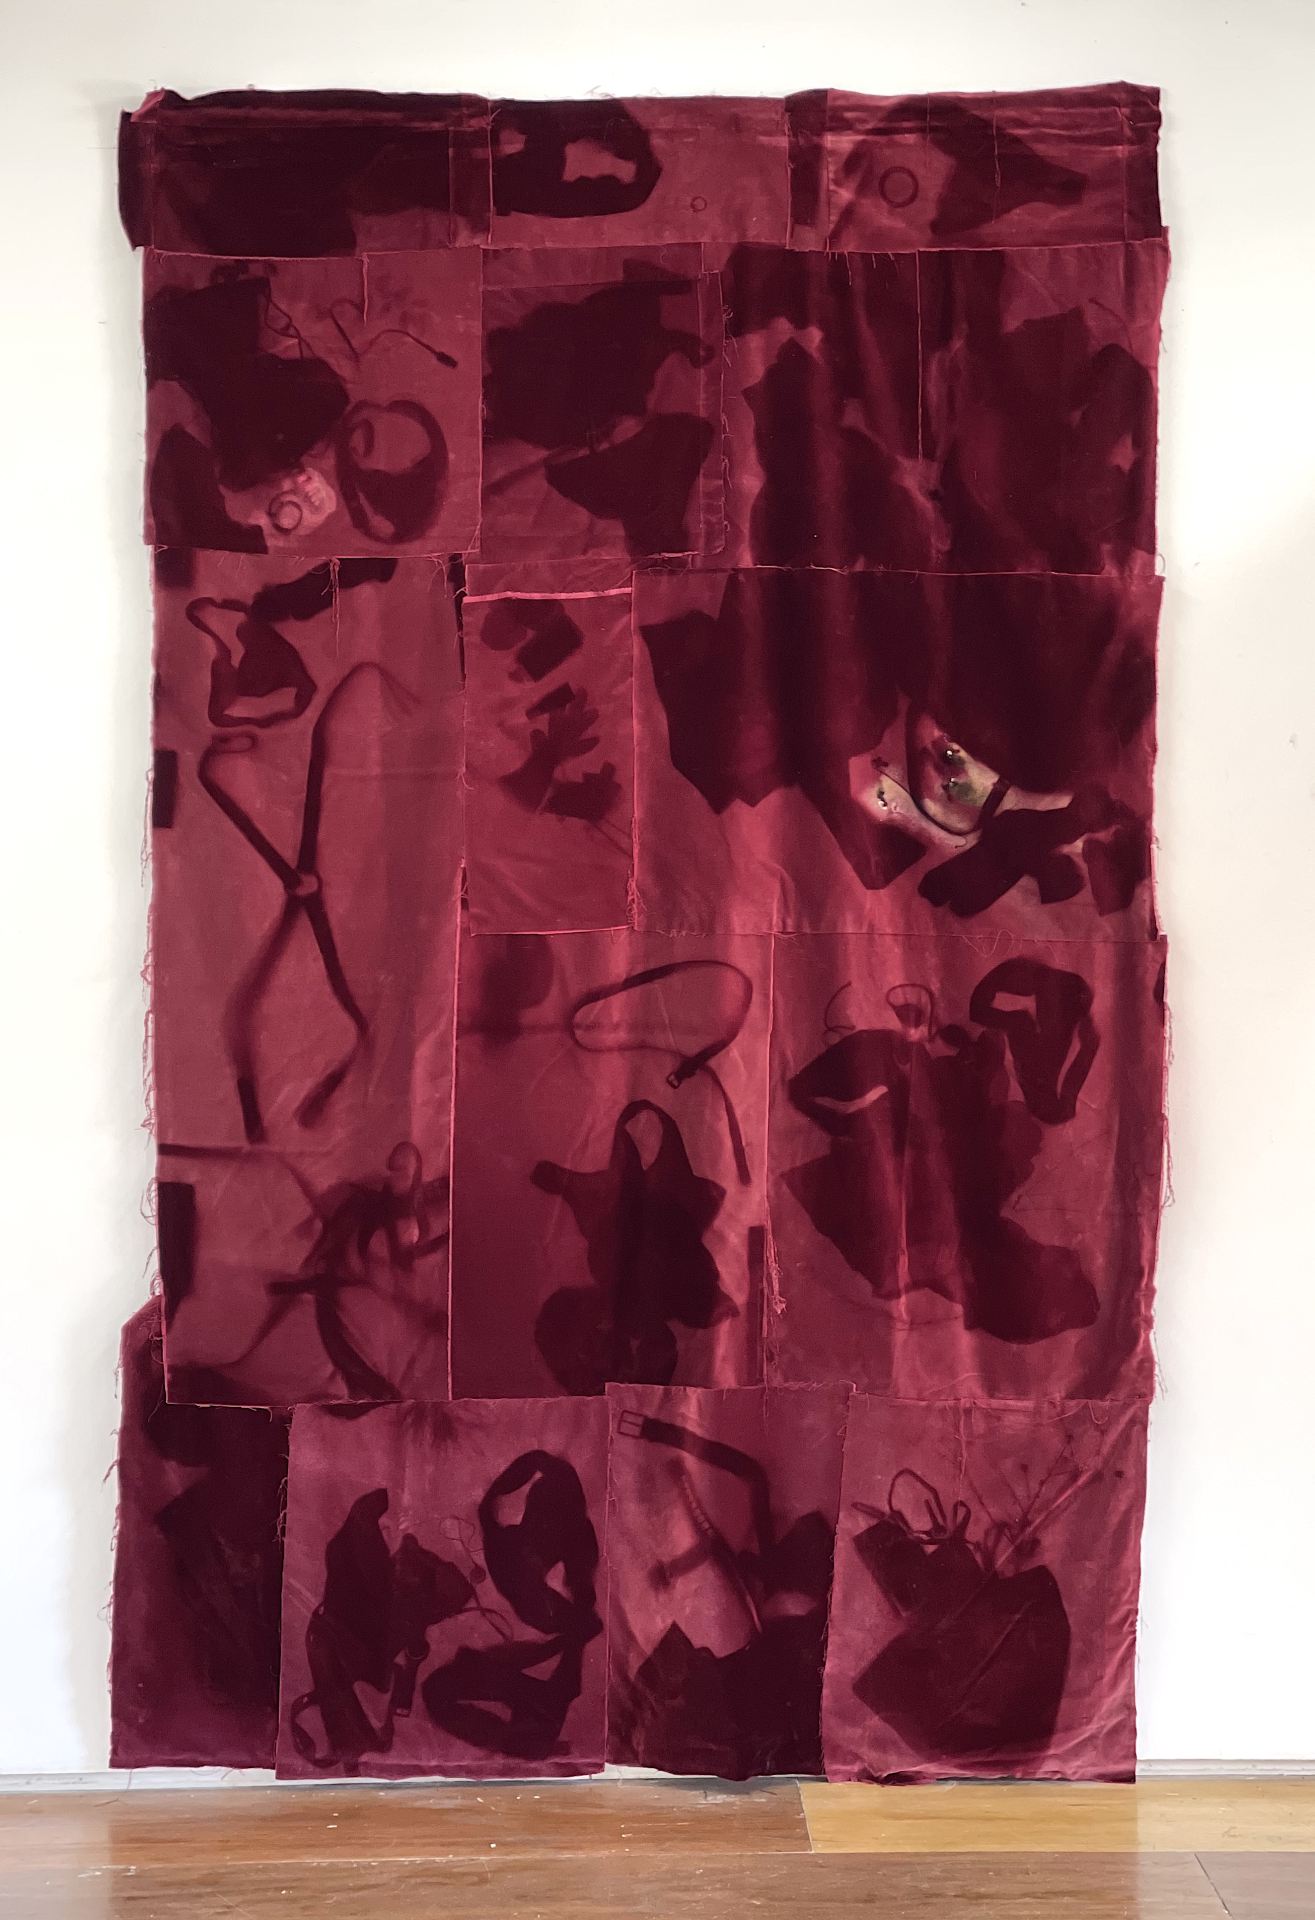 An image of a red velvet, patchwork curtain.